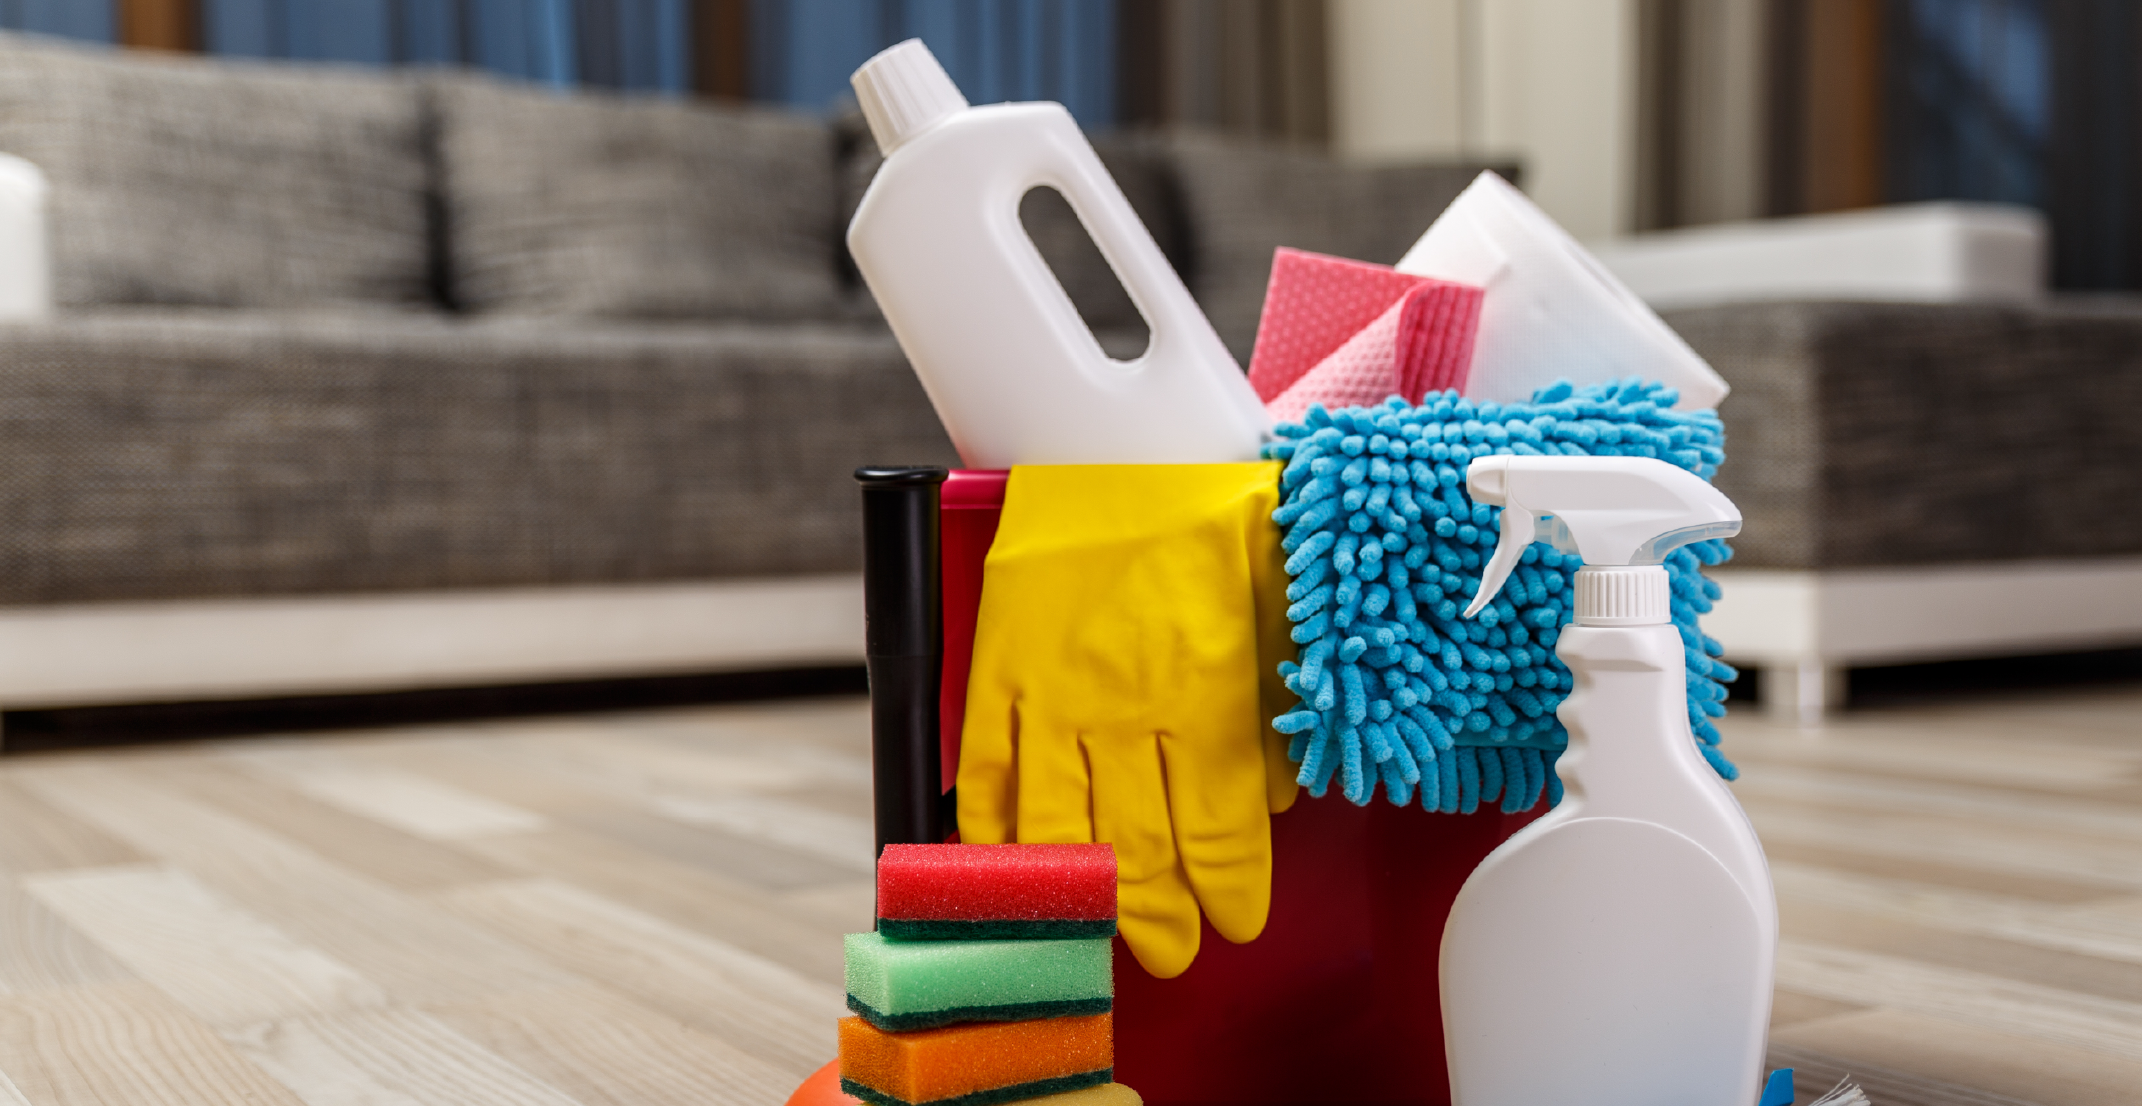 Handling Cleaning Chemicals for Beginners